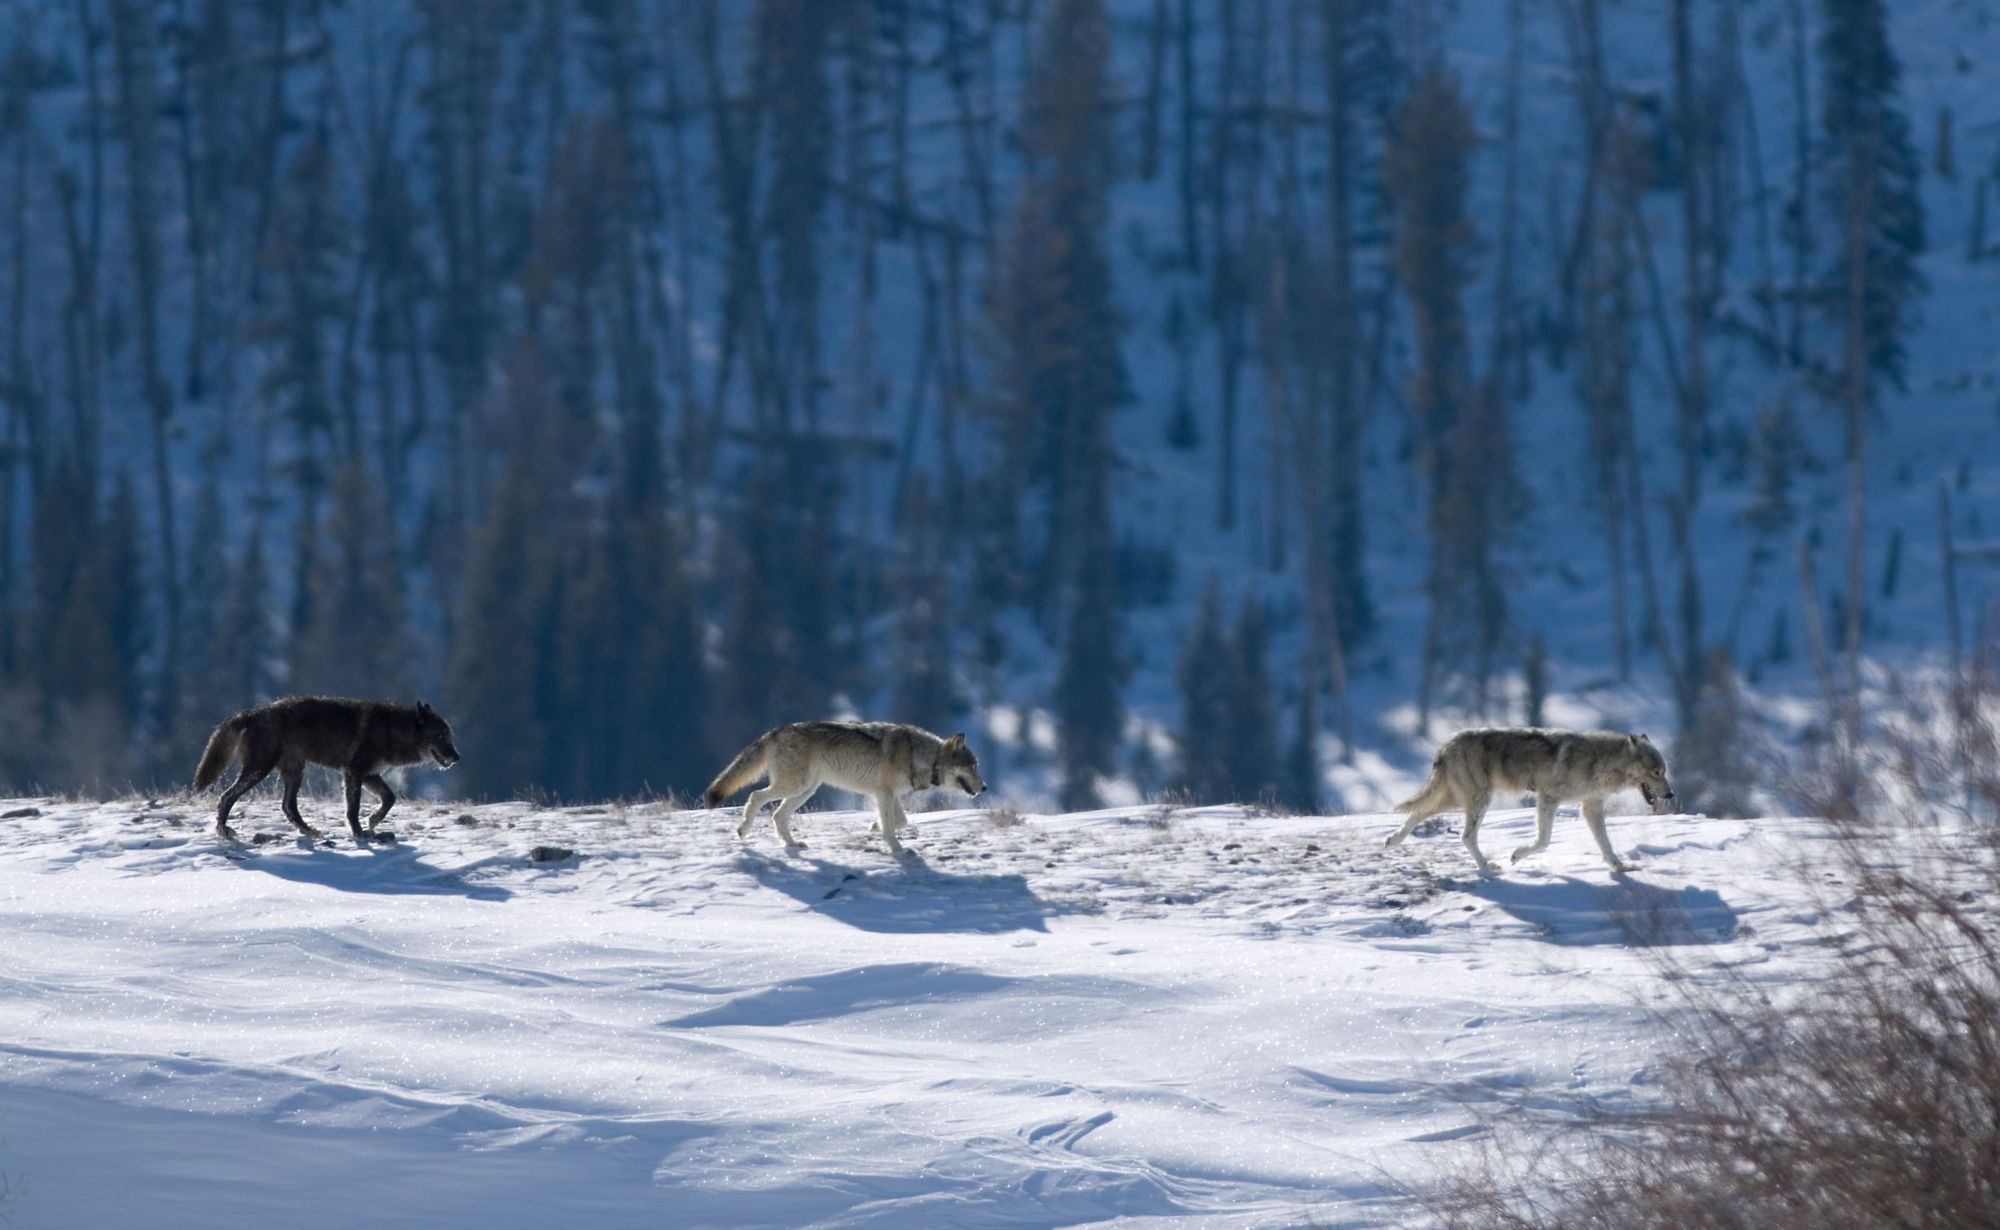 Three Druid timber wolves make their way through snow in Yellowstone National Park